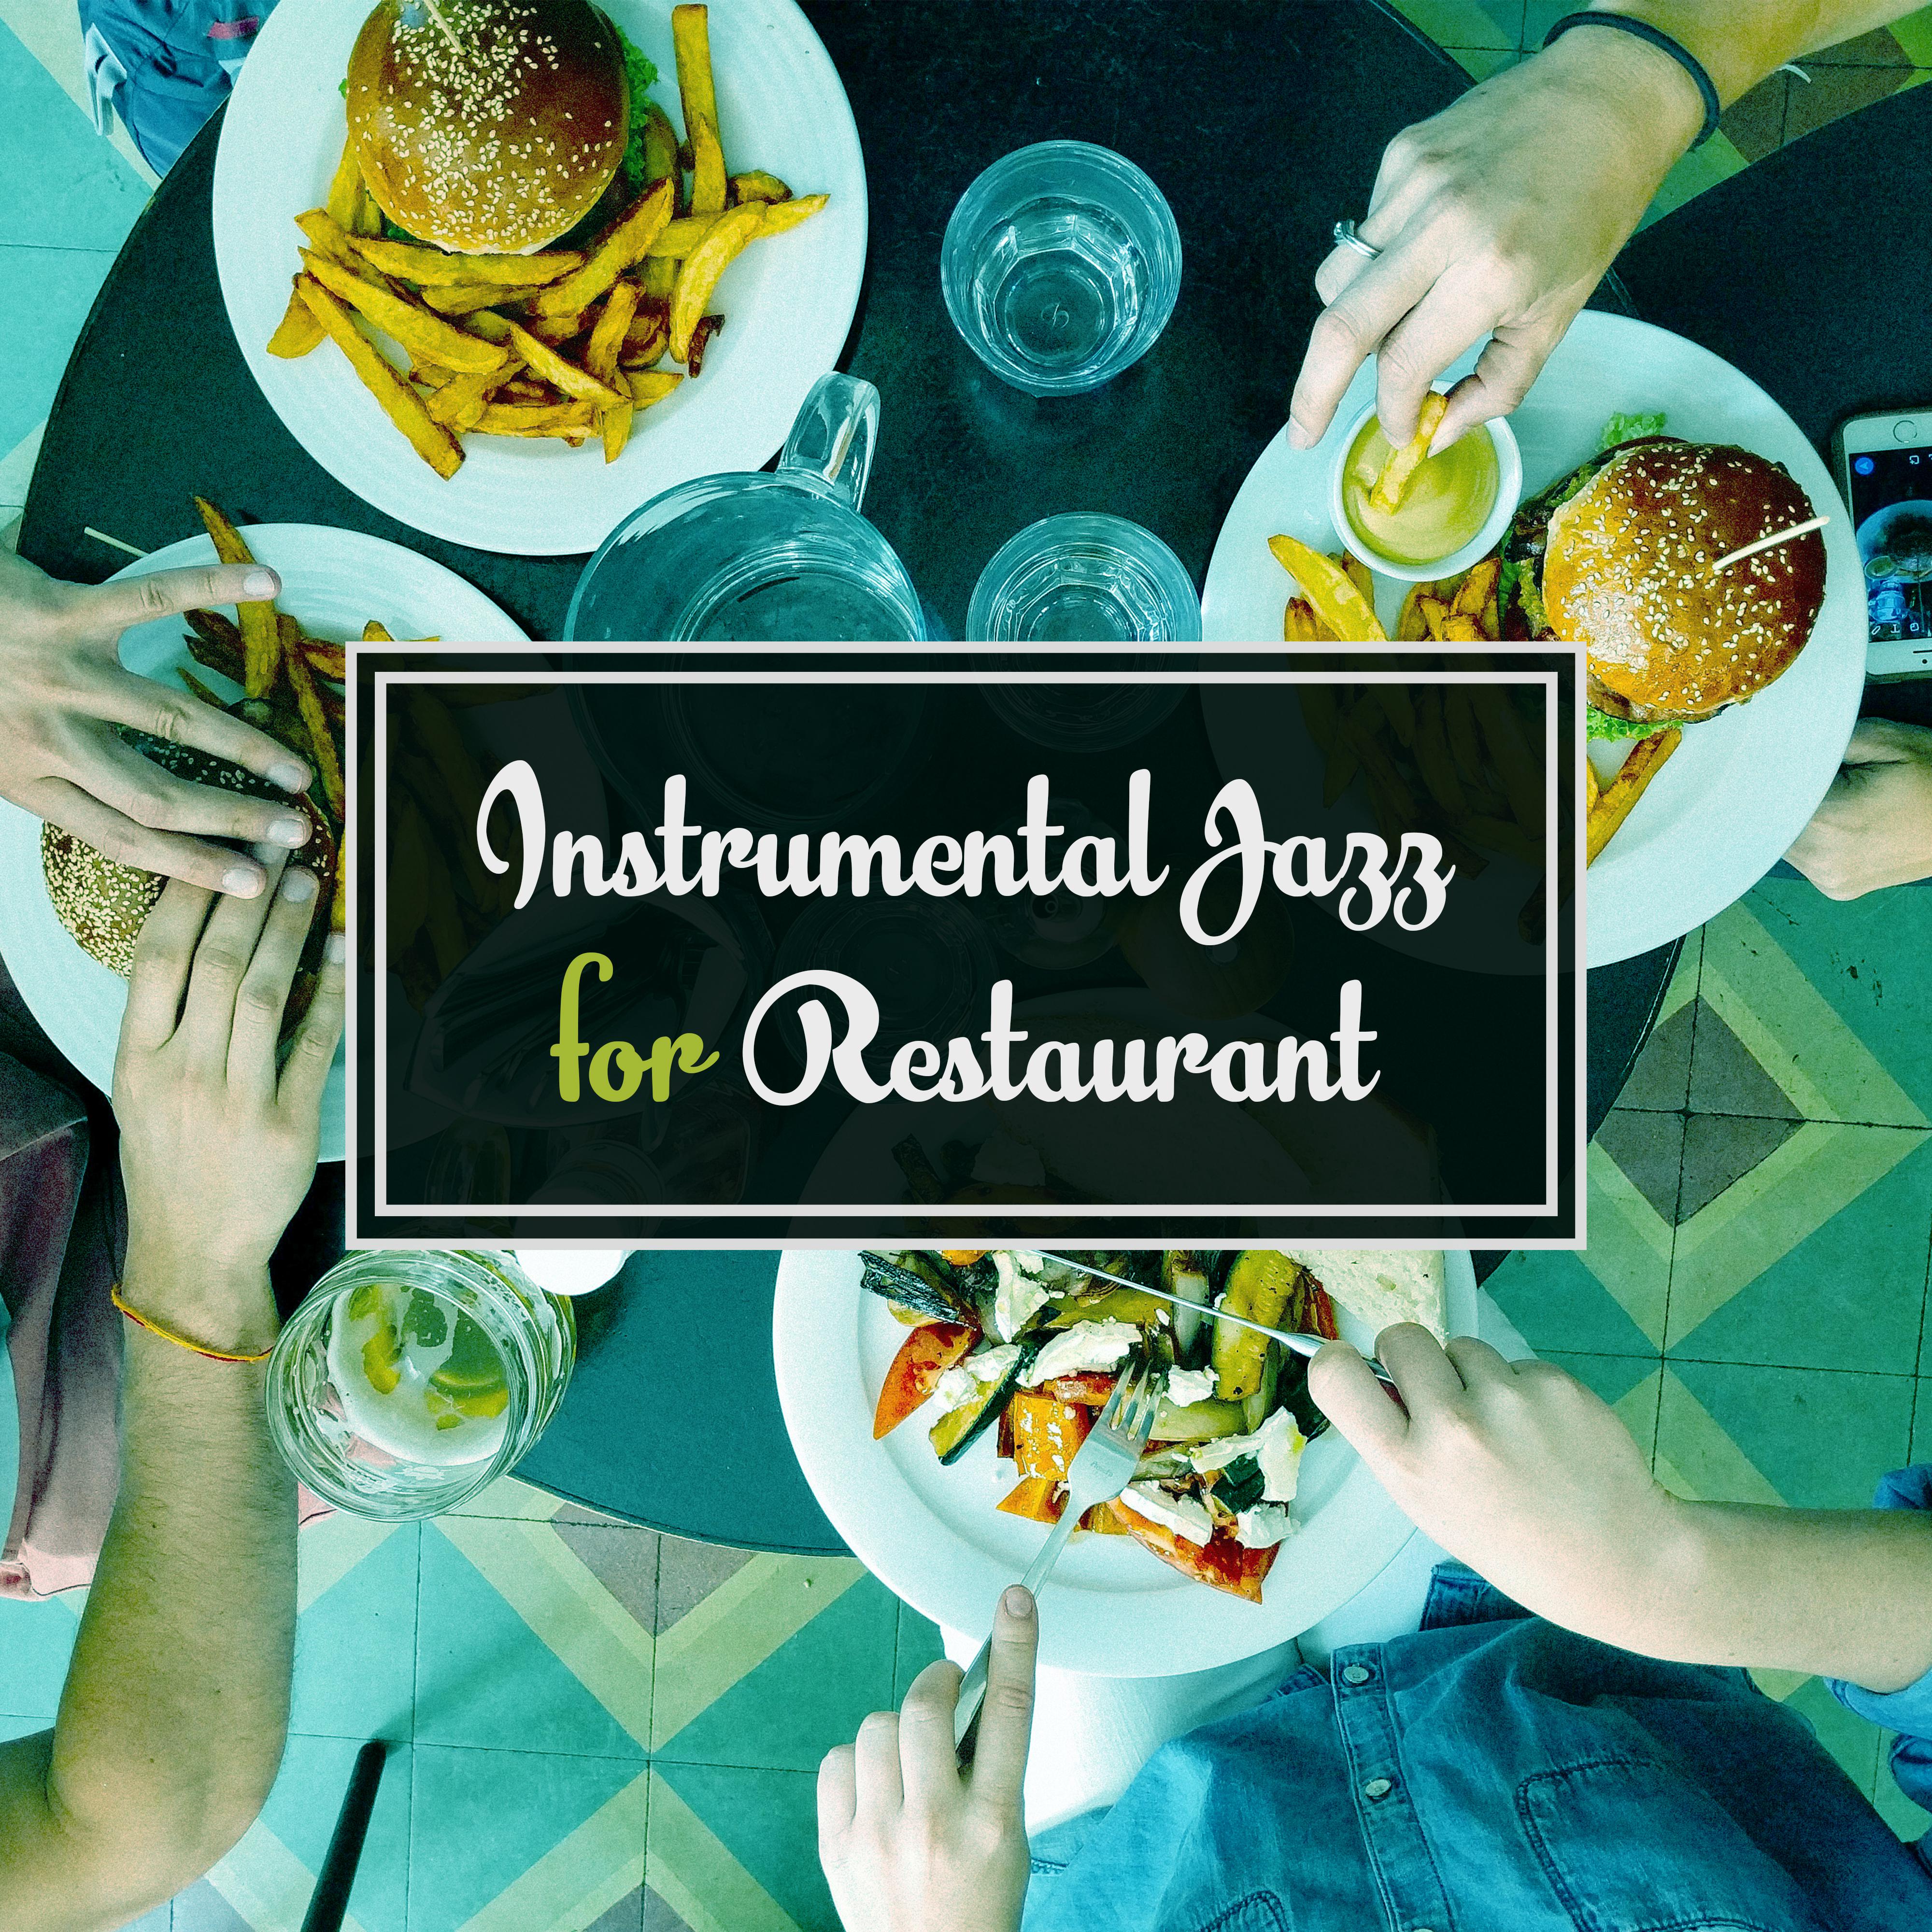 Instrumental Jazz for Restaurant – Piano Bar, Healing Guitar, Deep Relaxation, Jazz Cafe, Dinner with Family, Smooth Jazz, Relax